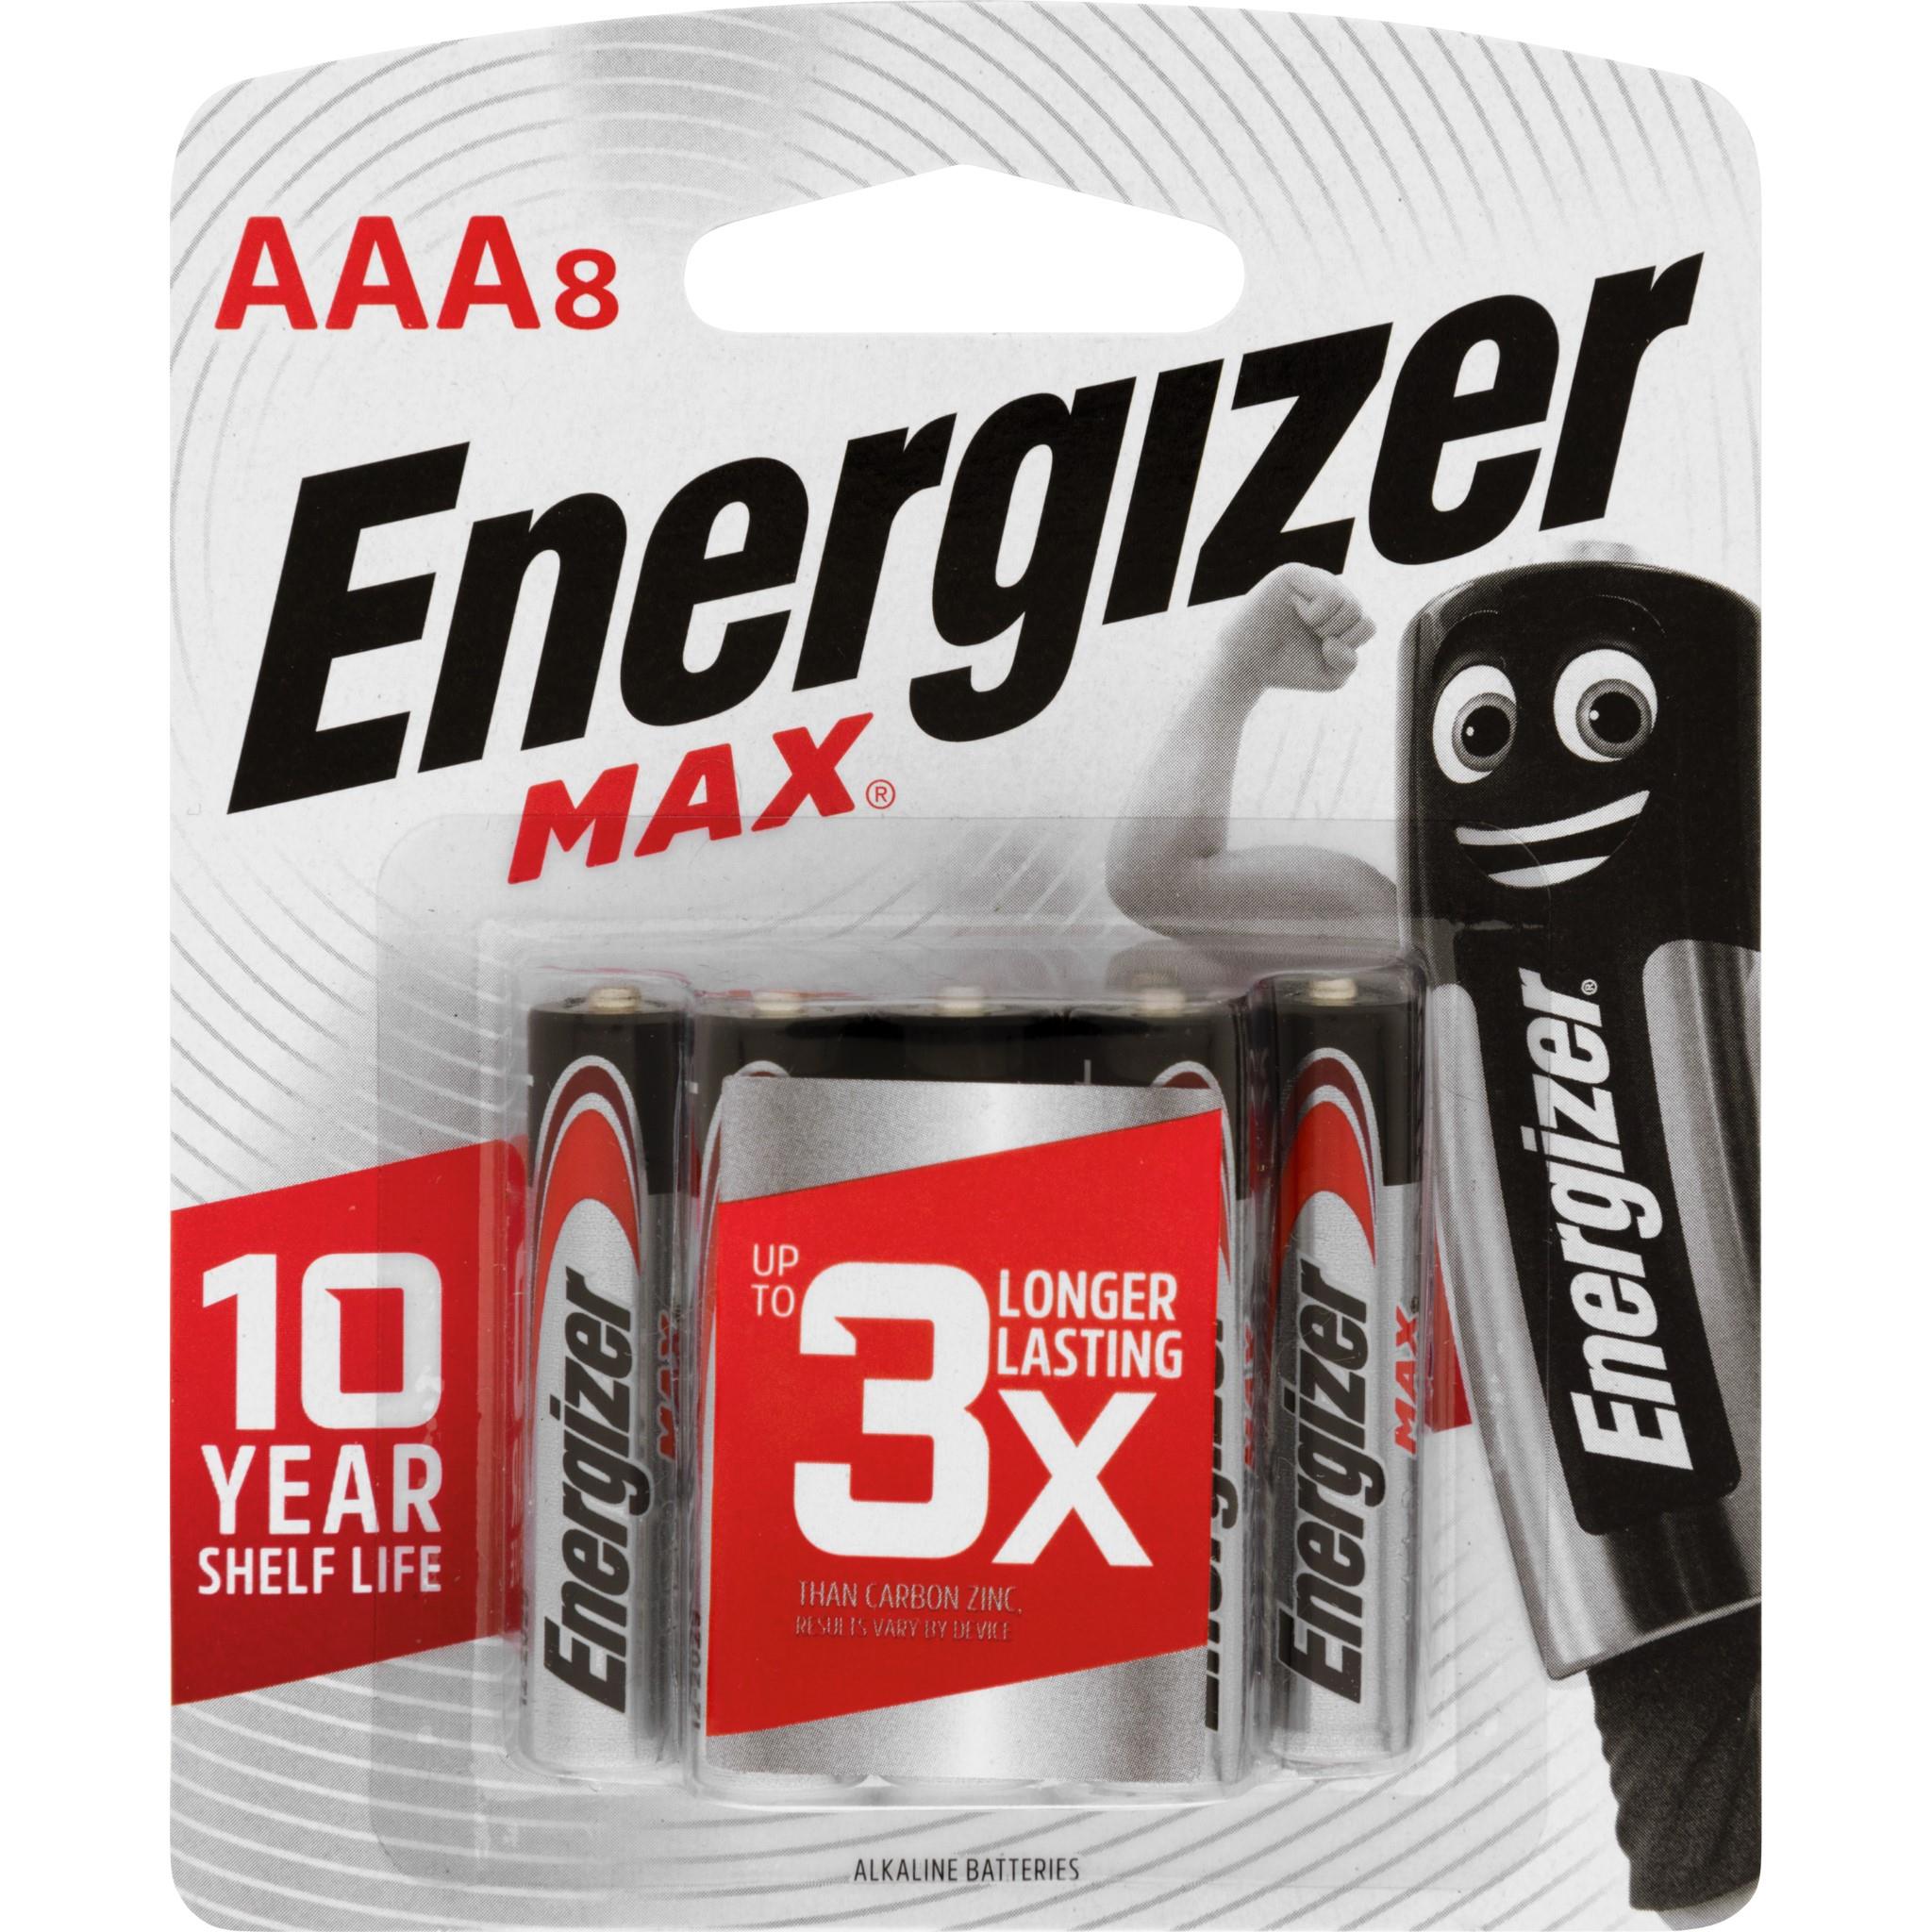 energizer batteries feature how much battery life remaining